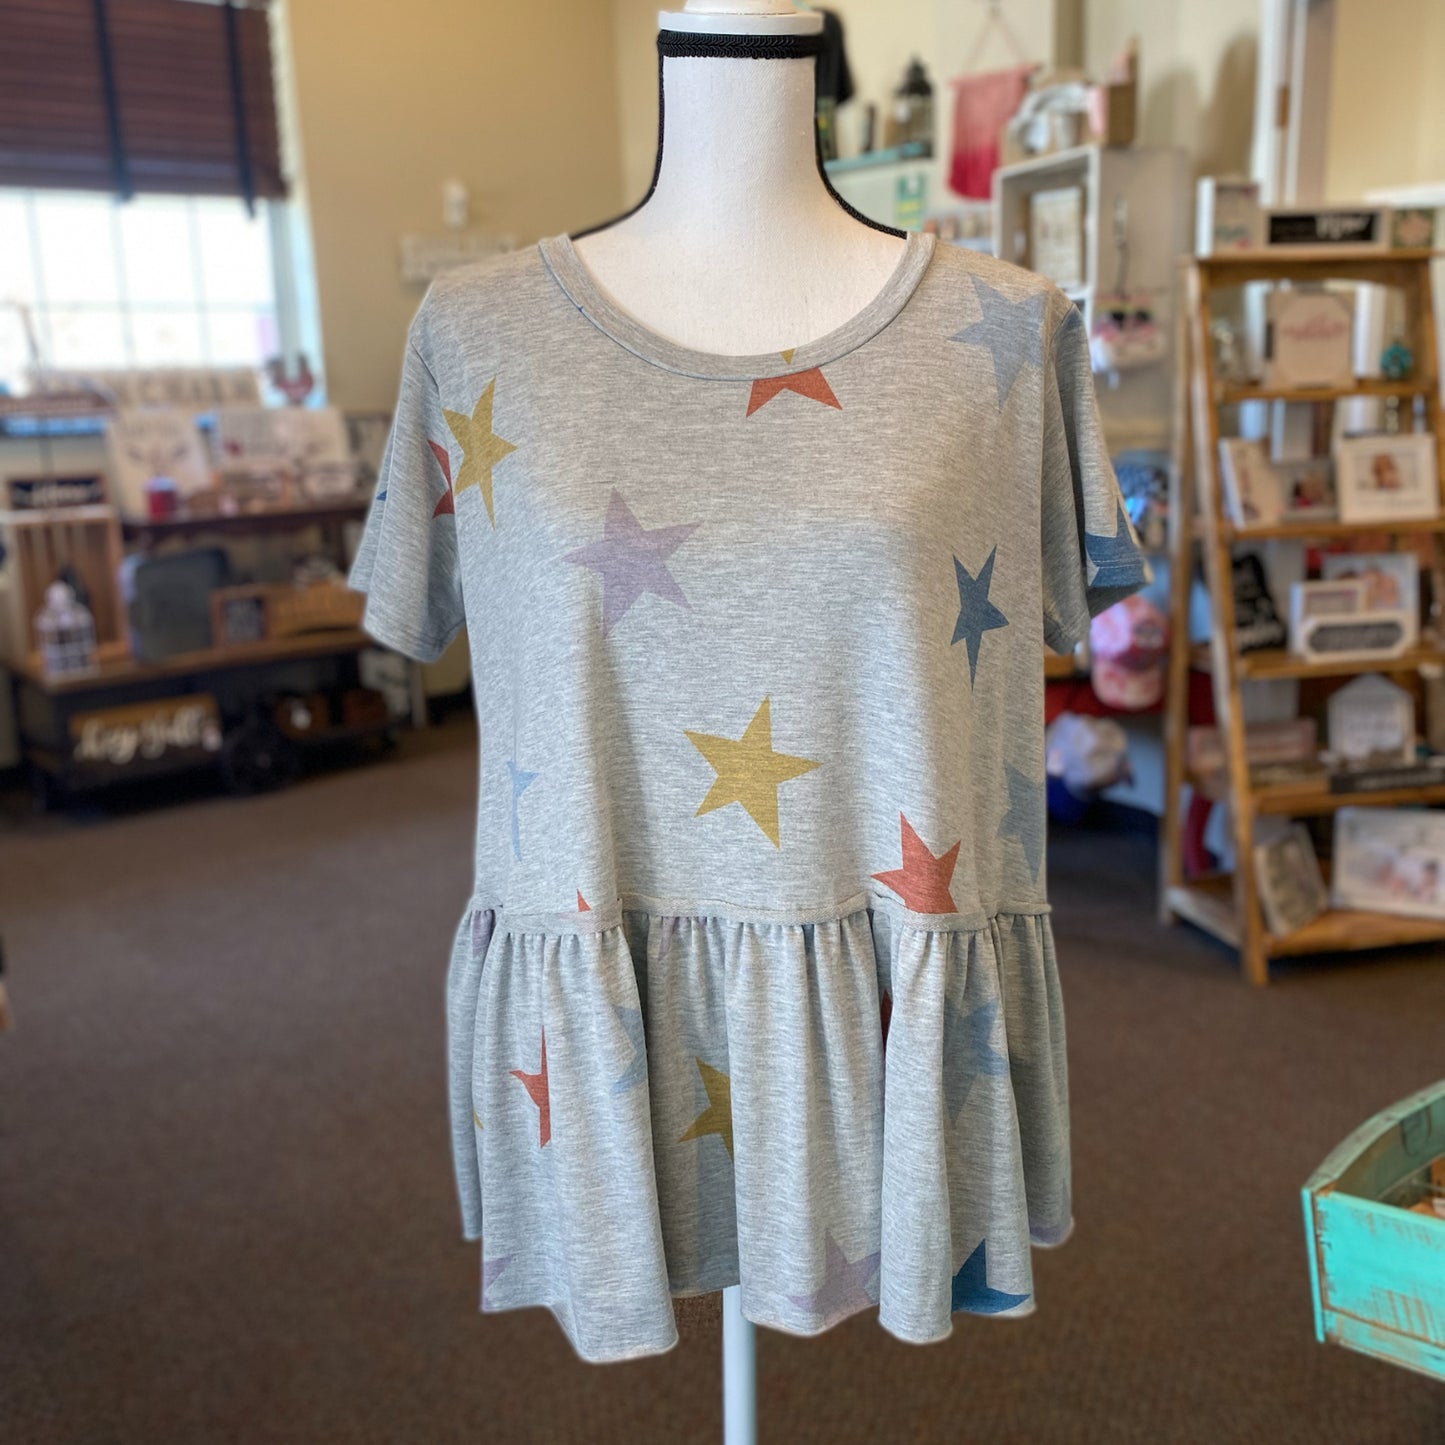 Entro Star Print Top - Size Large